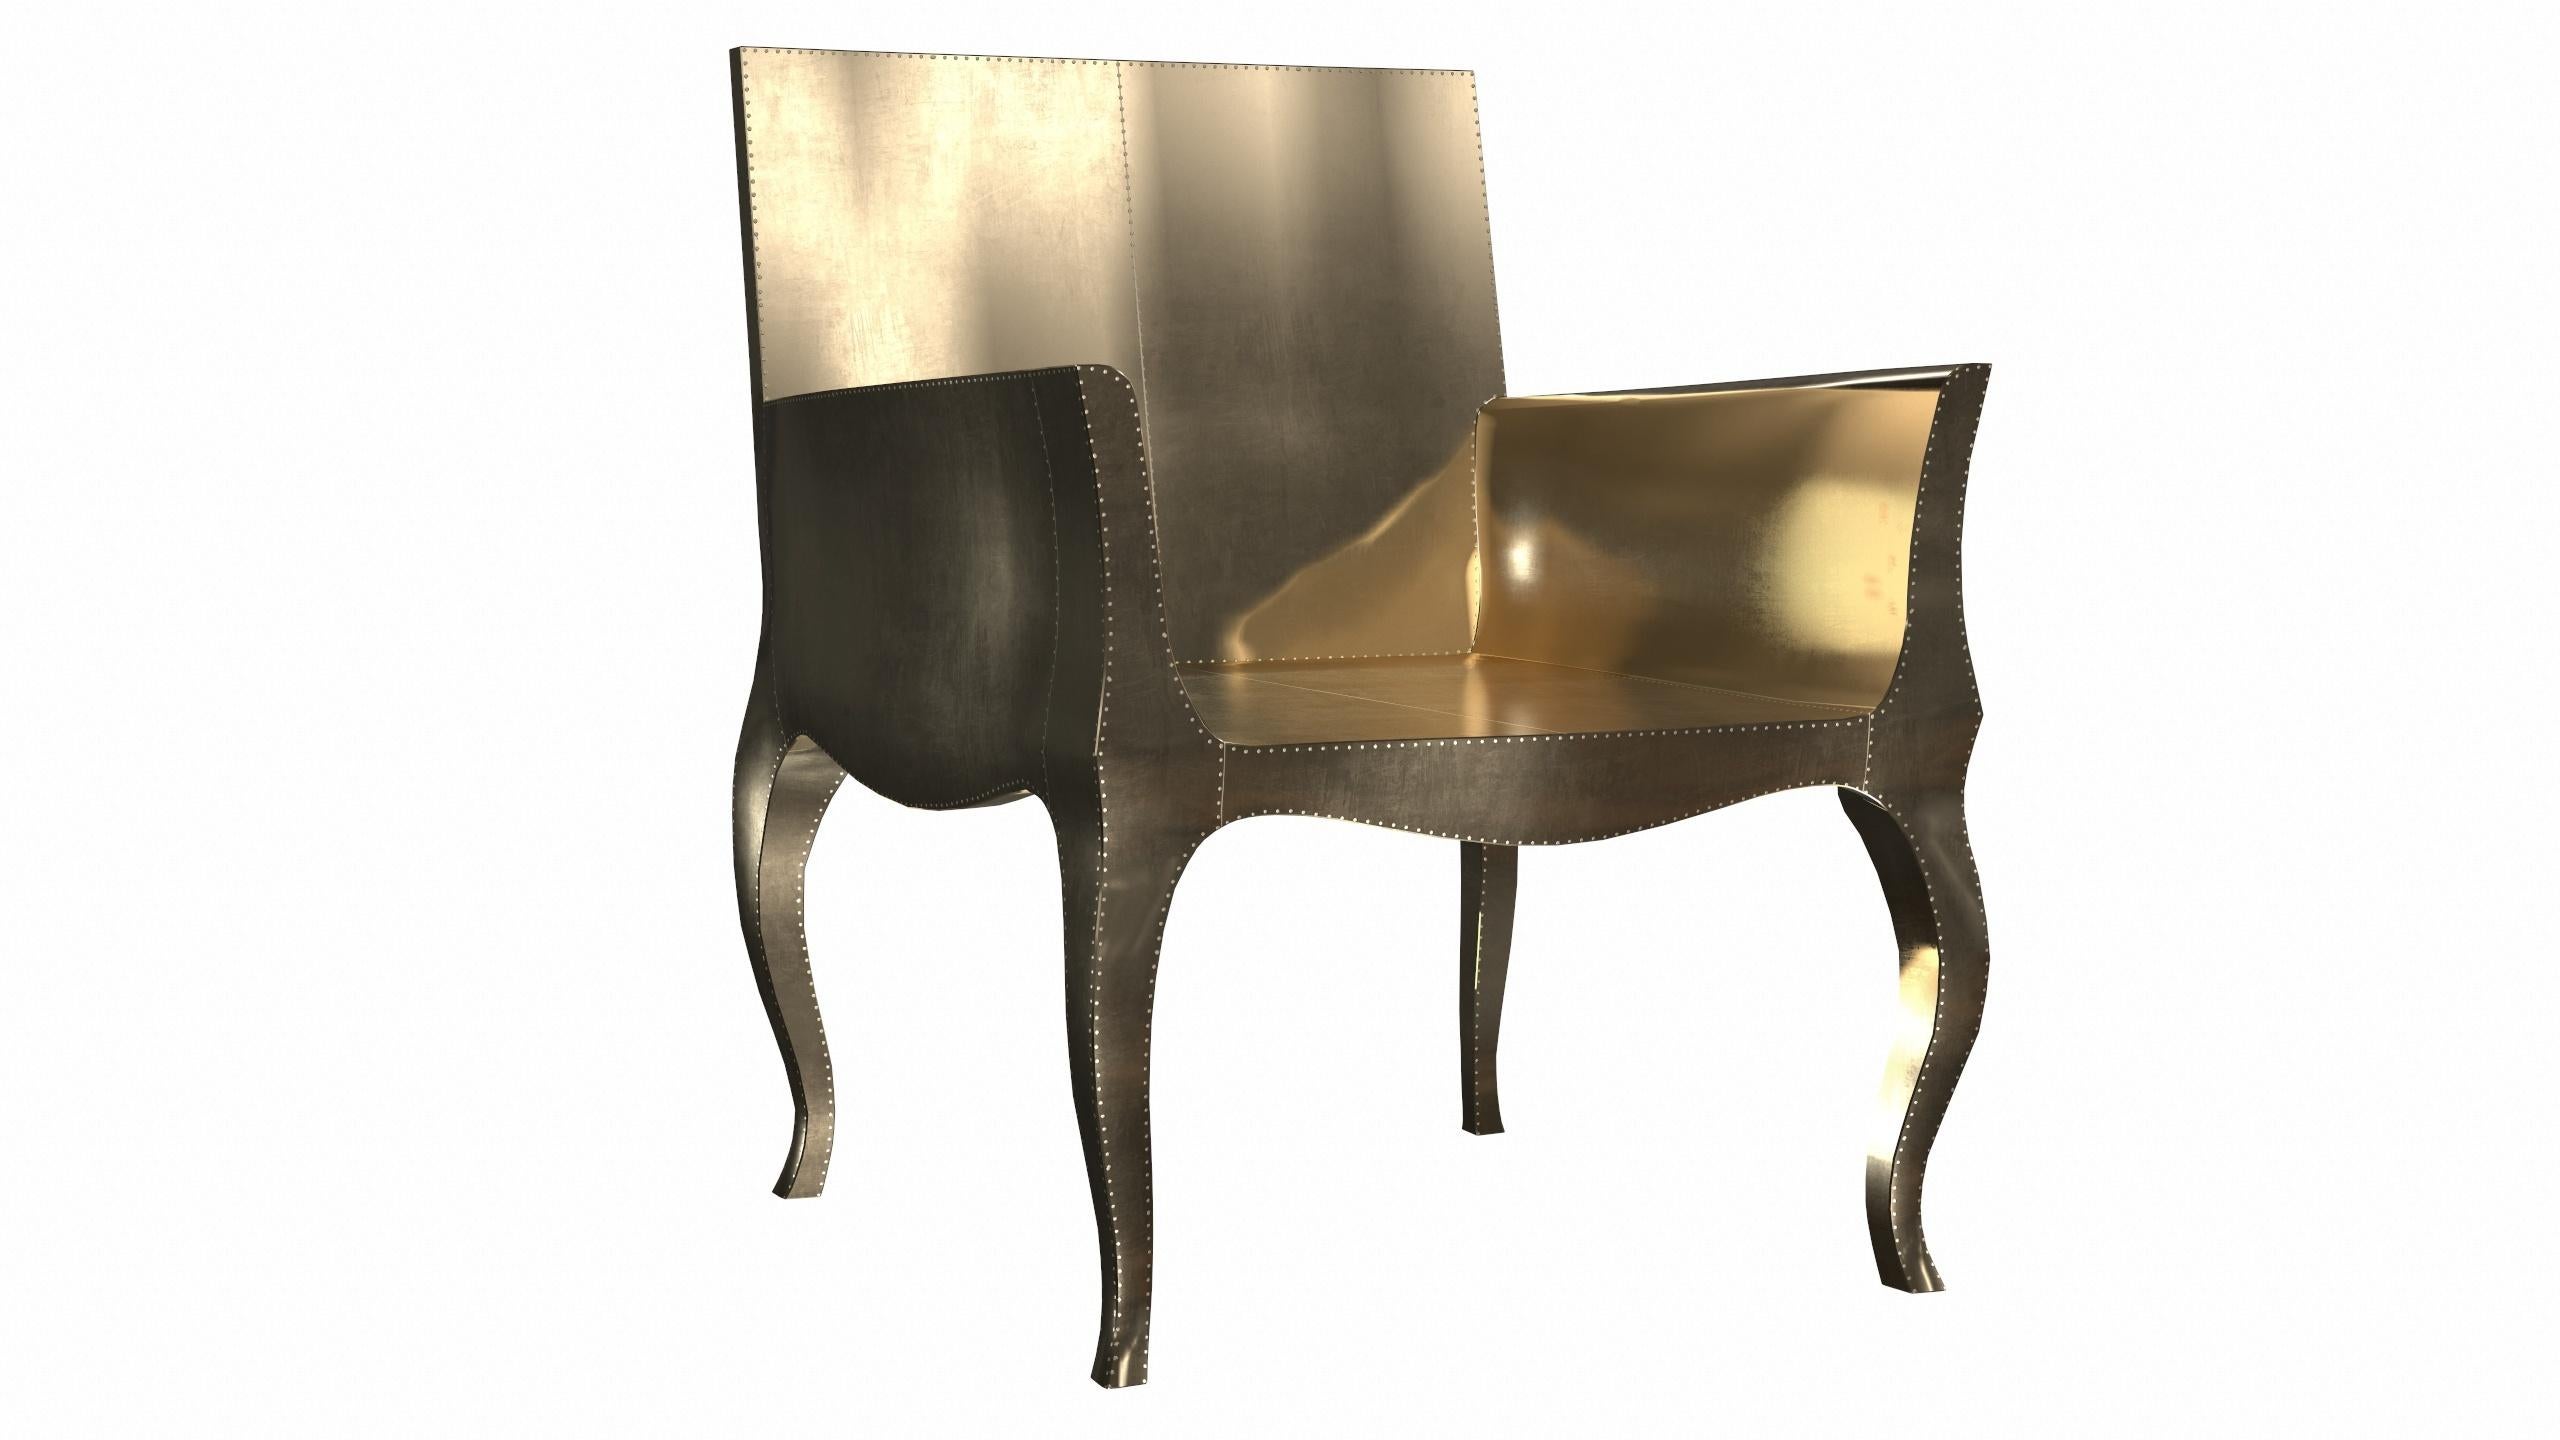 Art Deco Style Chairs in Smooth Brass by Paul Mathieu for S. Odegard In New Condition For Sale In New York, NY